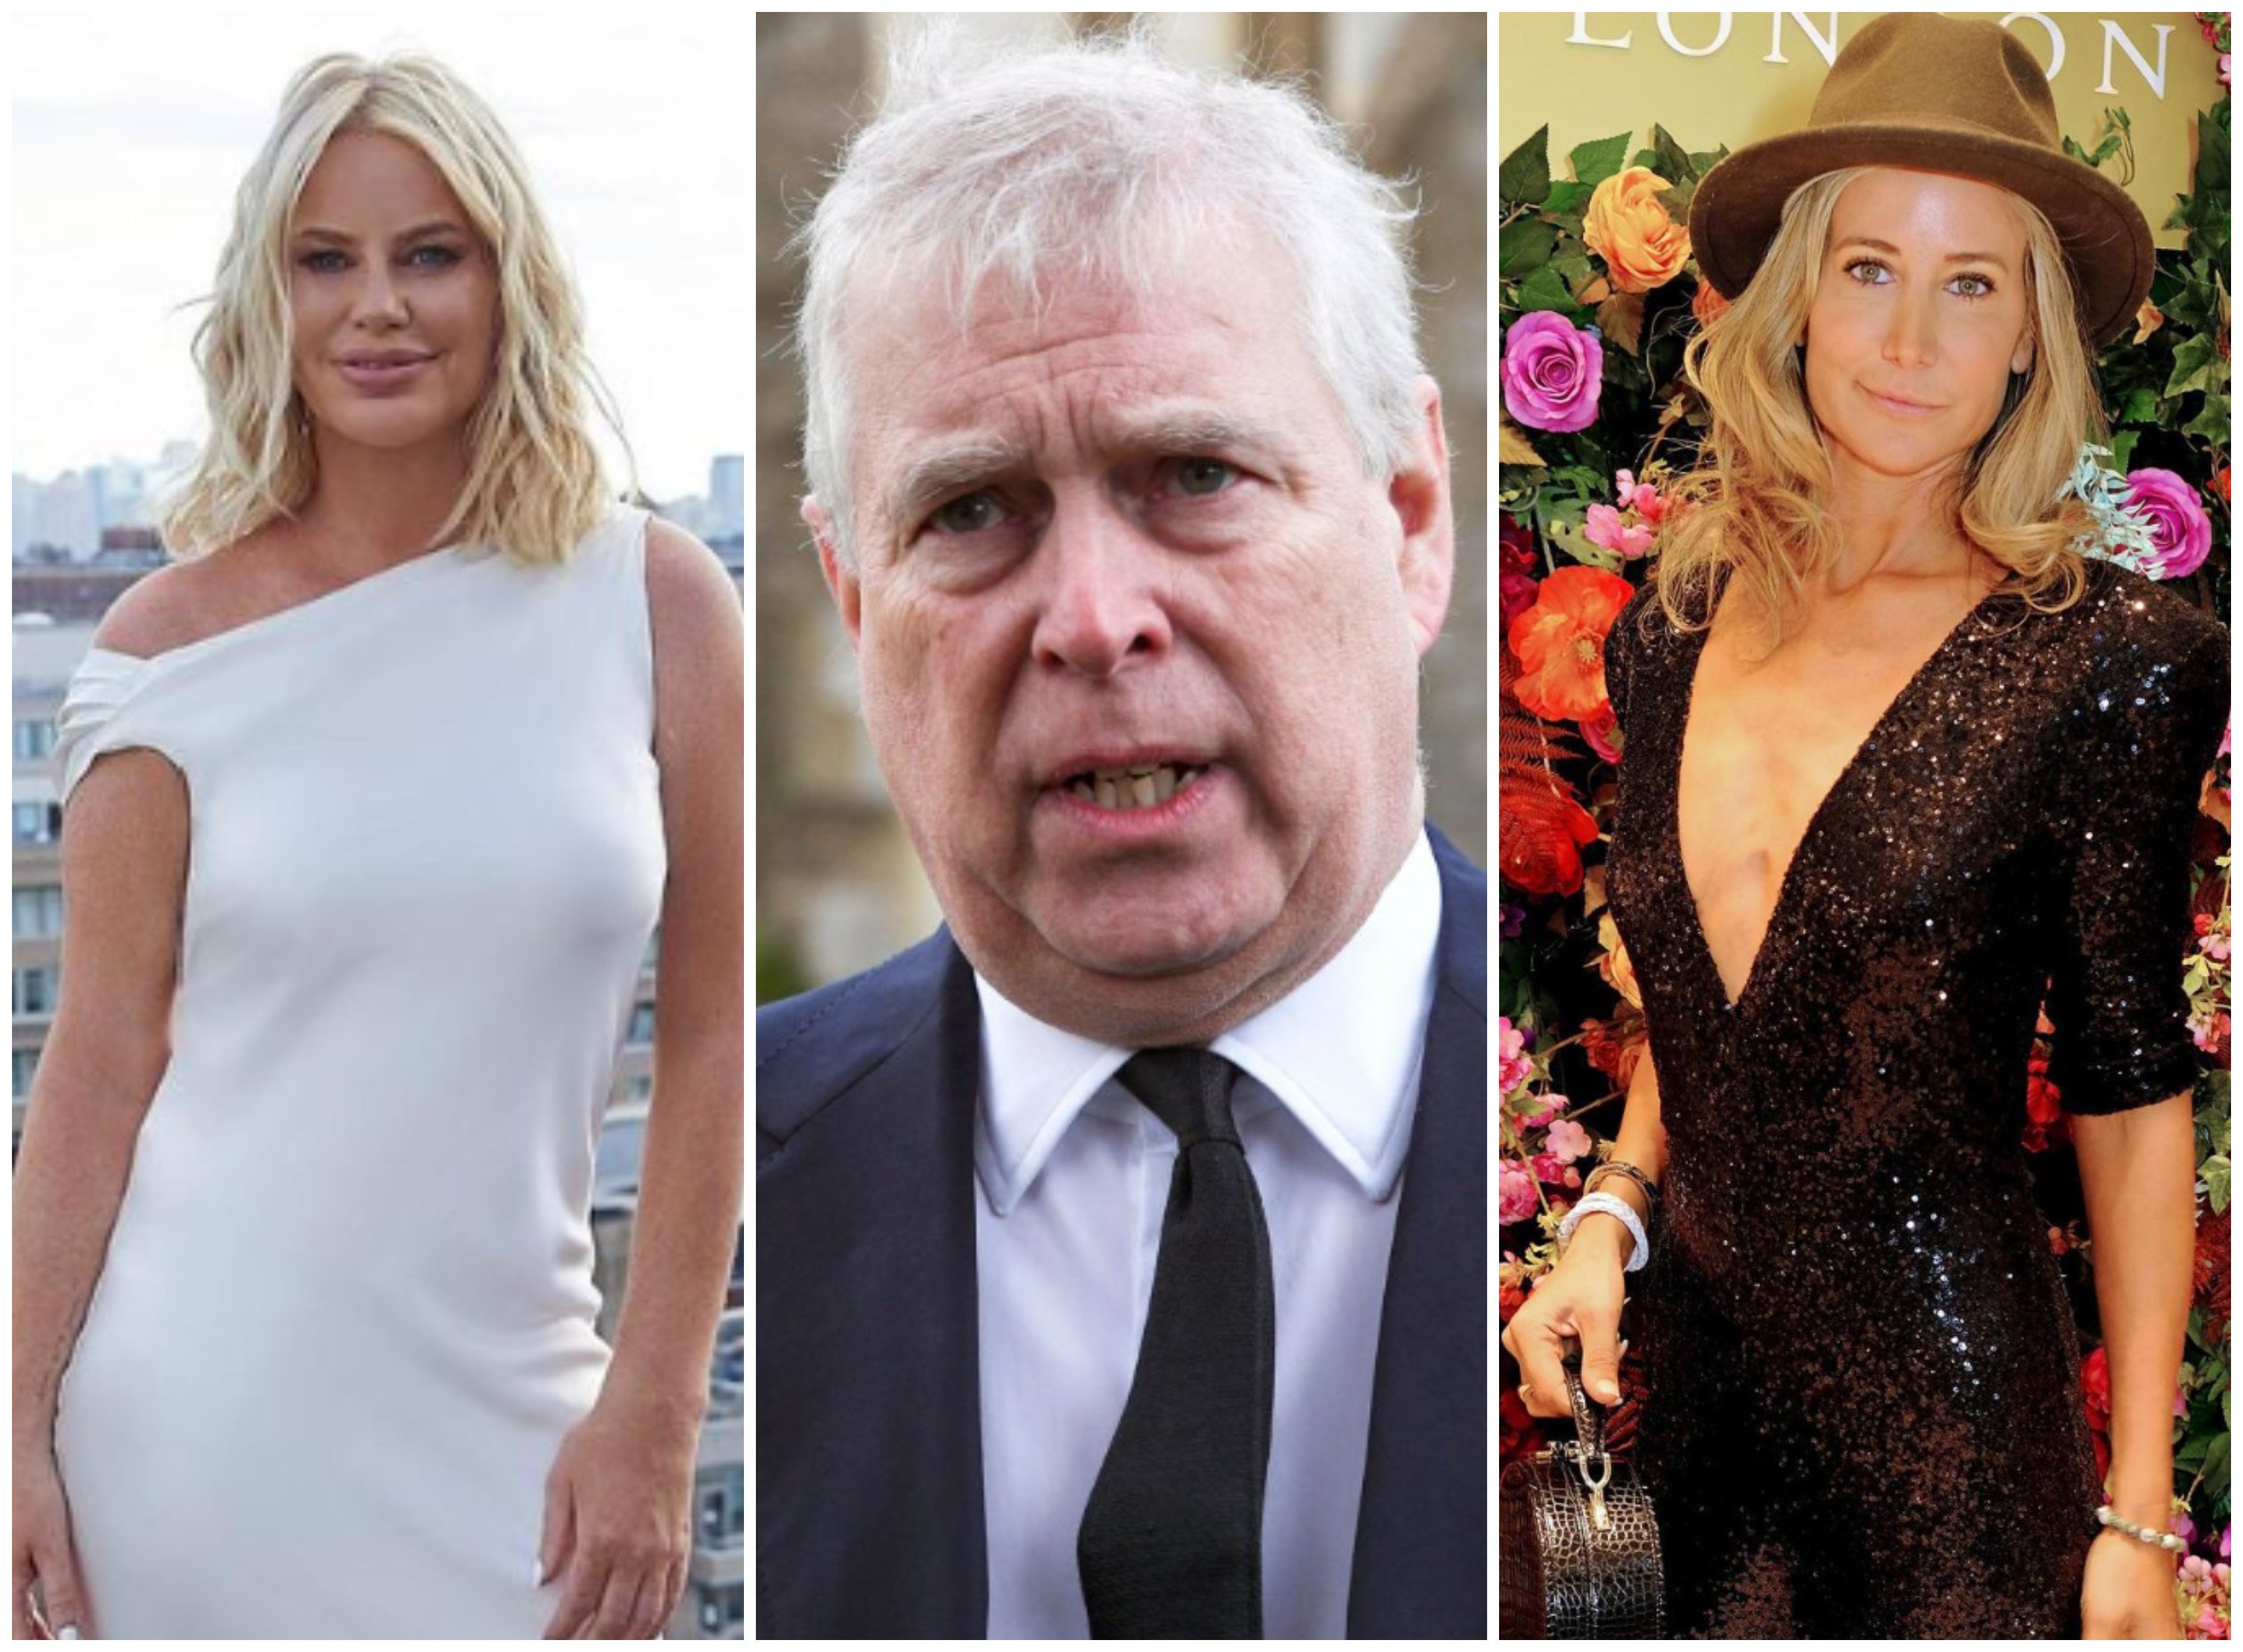 Disgraced royal Prince Andrew (centre) has reportedly dated several women since splitting from his wife Sarah Ferguson in the 90s, including Caroline Stanbury (left) and Lady Victoria Hervey (right). Photos: @carolinestanbury, @ladyvictoriahervey/Instagram; AFP